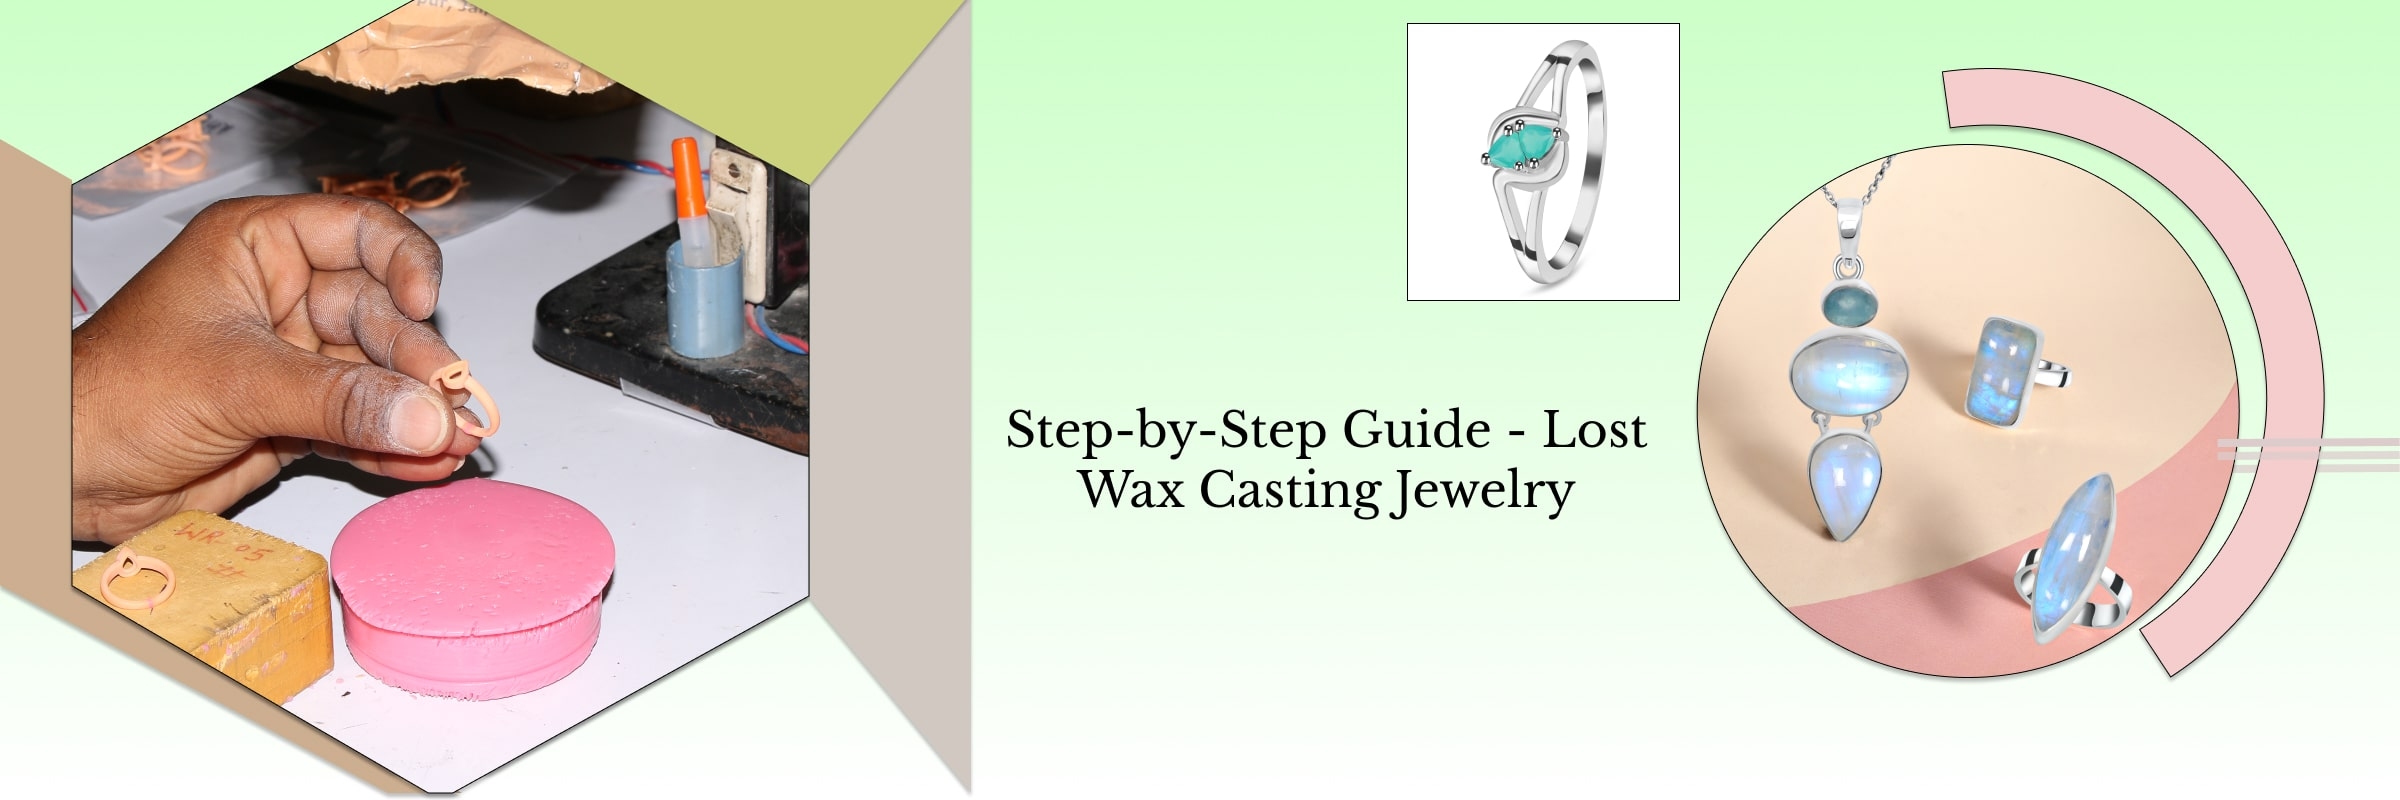 The Lost-Wax Casting Process for Creating Casting Jewelry